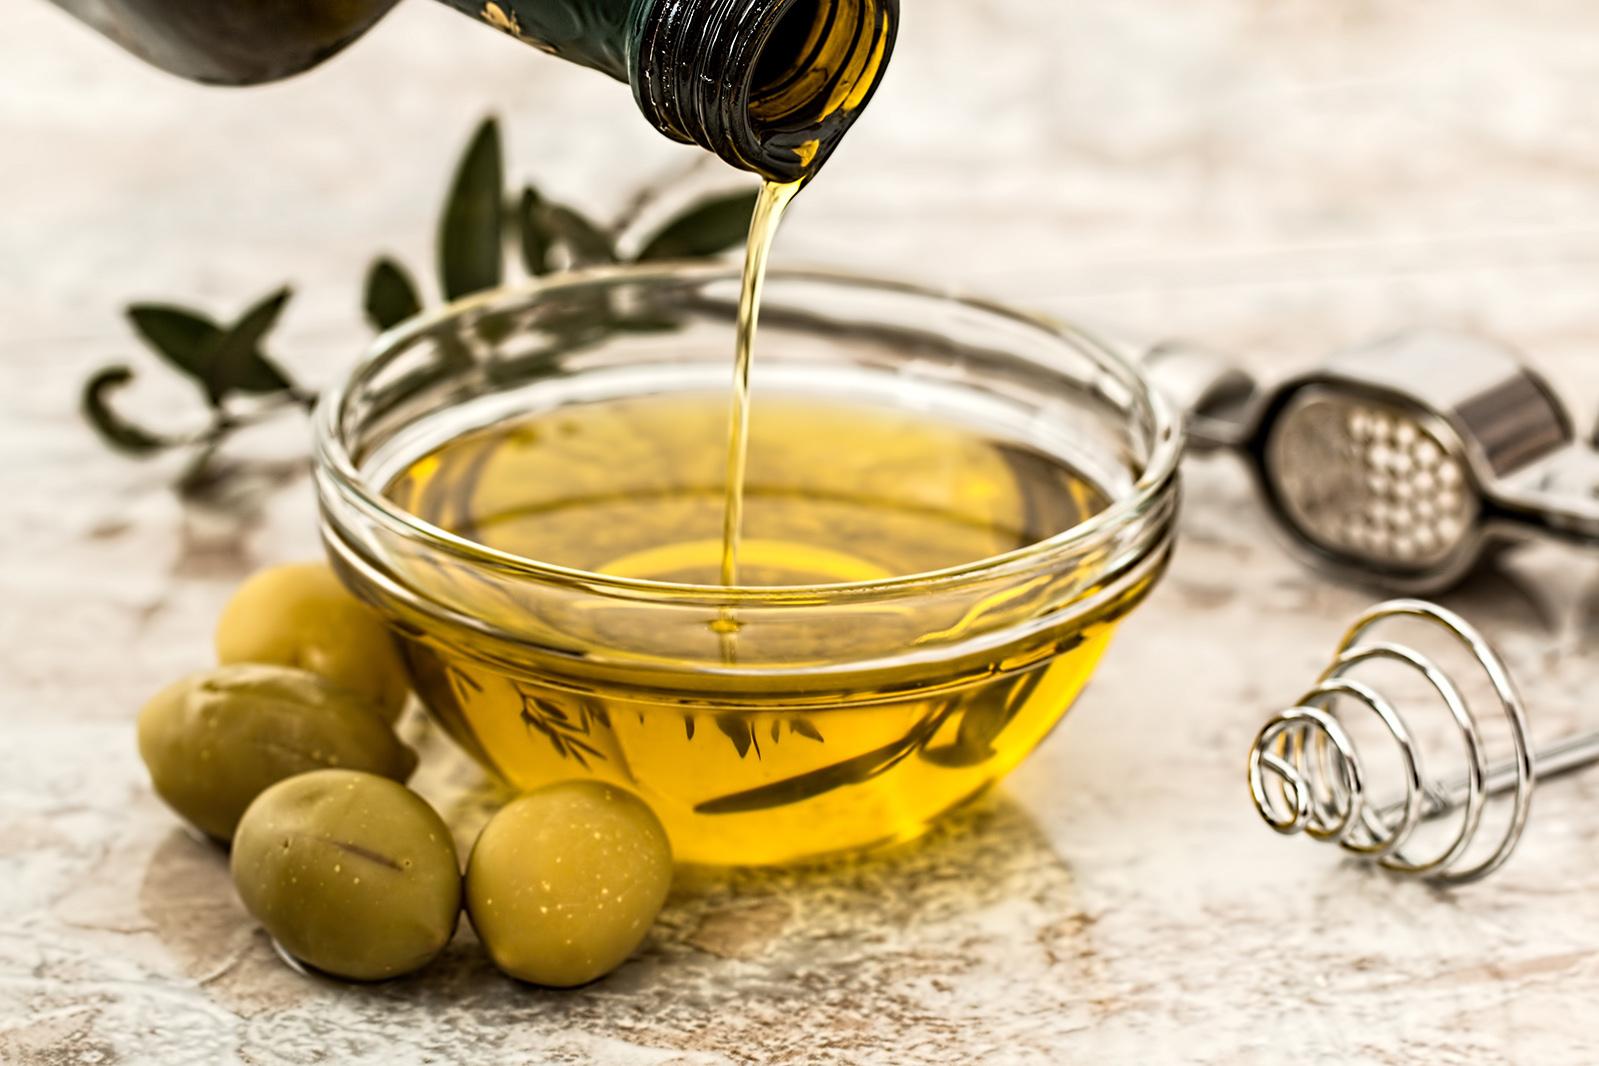 Croatian olive oil: try the liquid gold of the Mediterranean